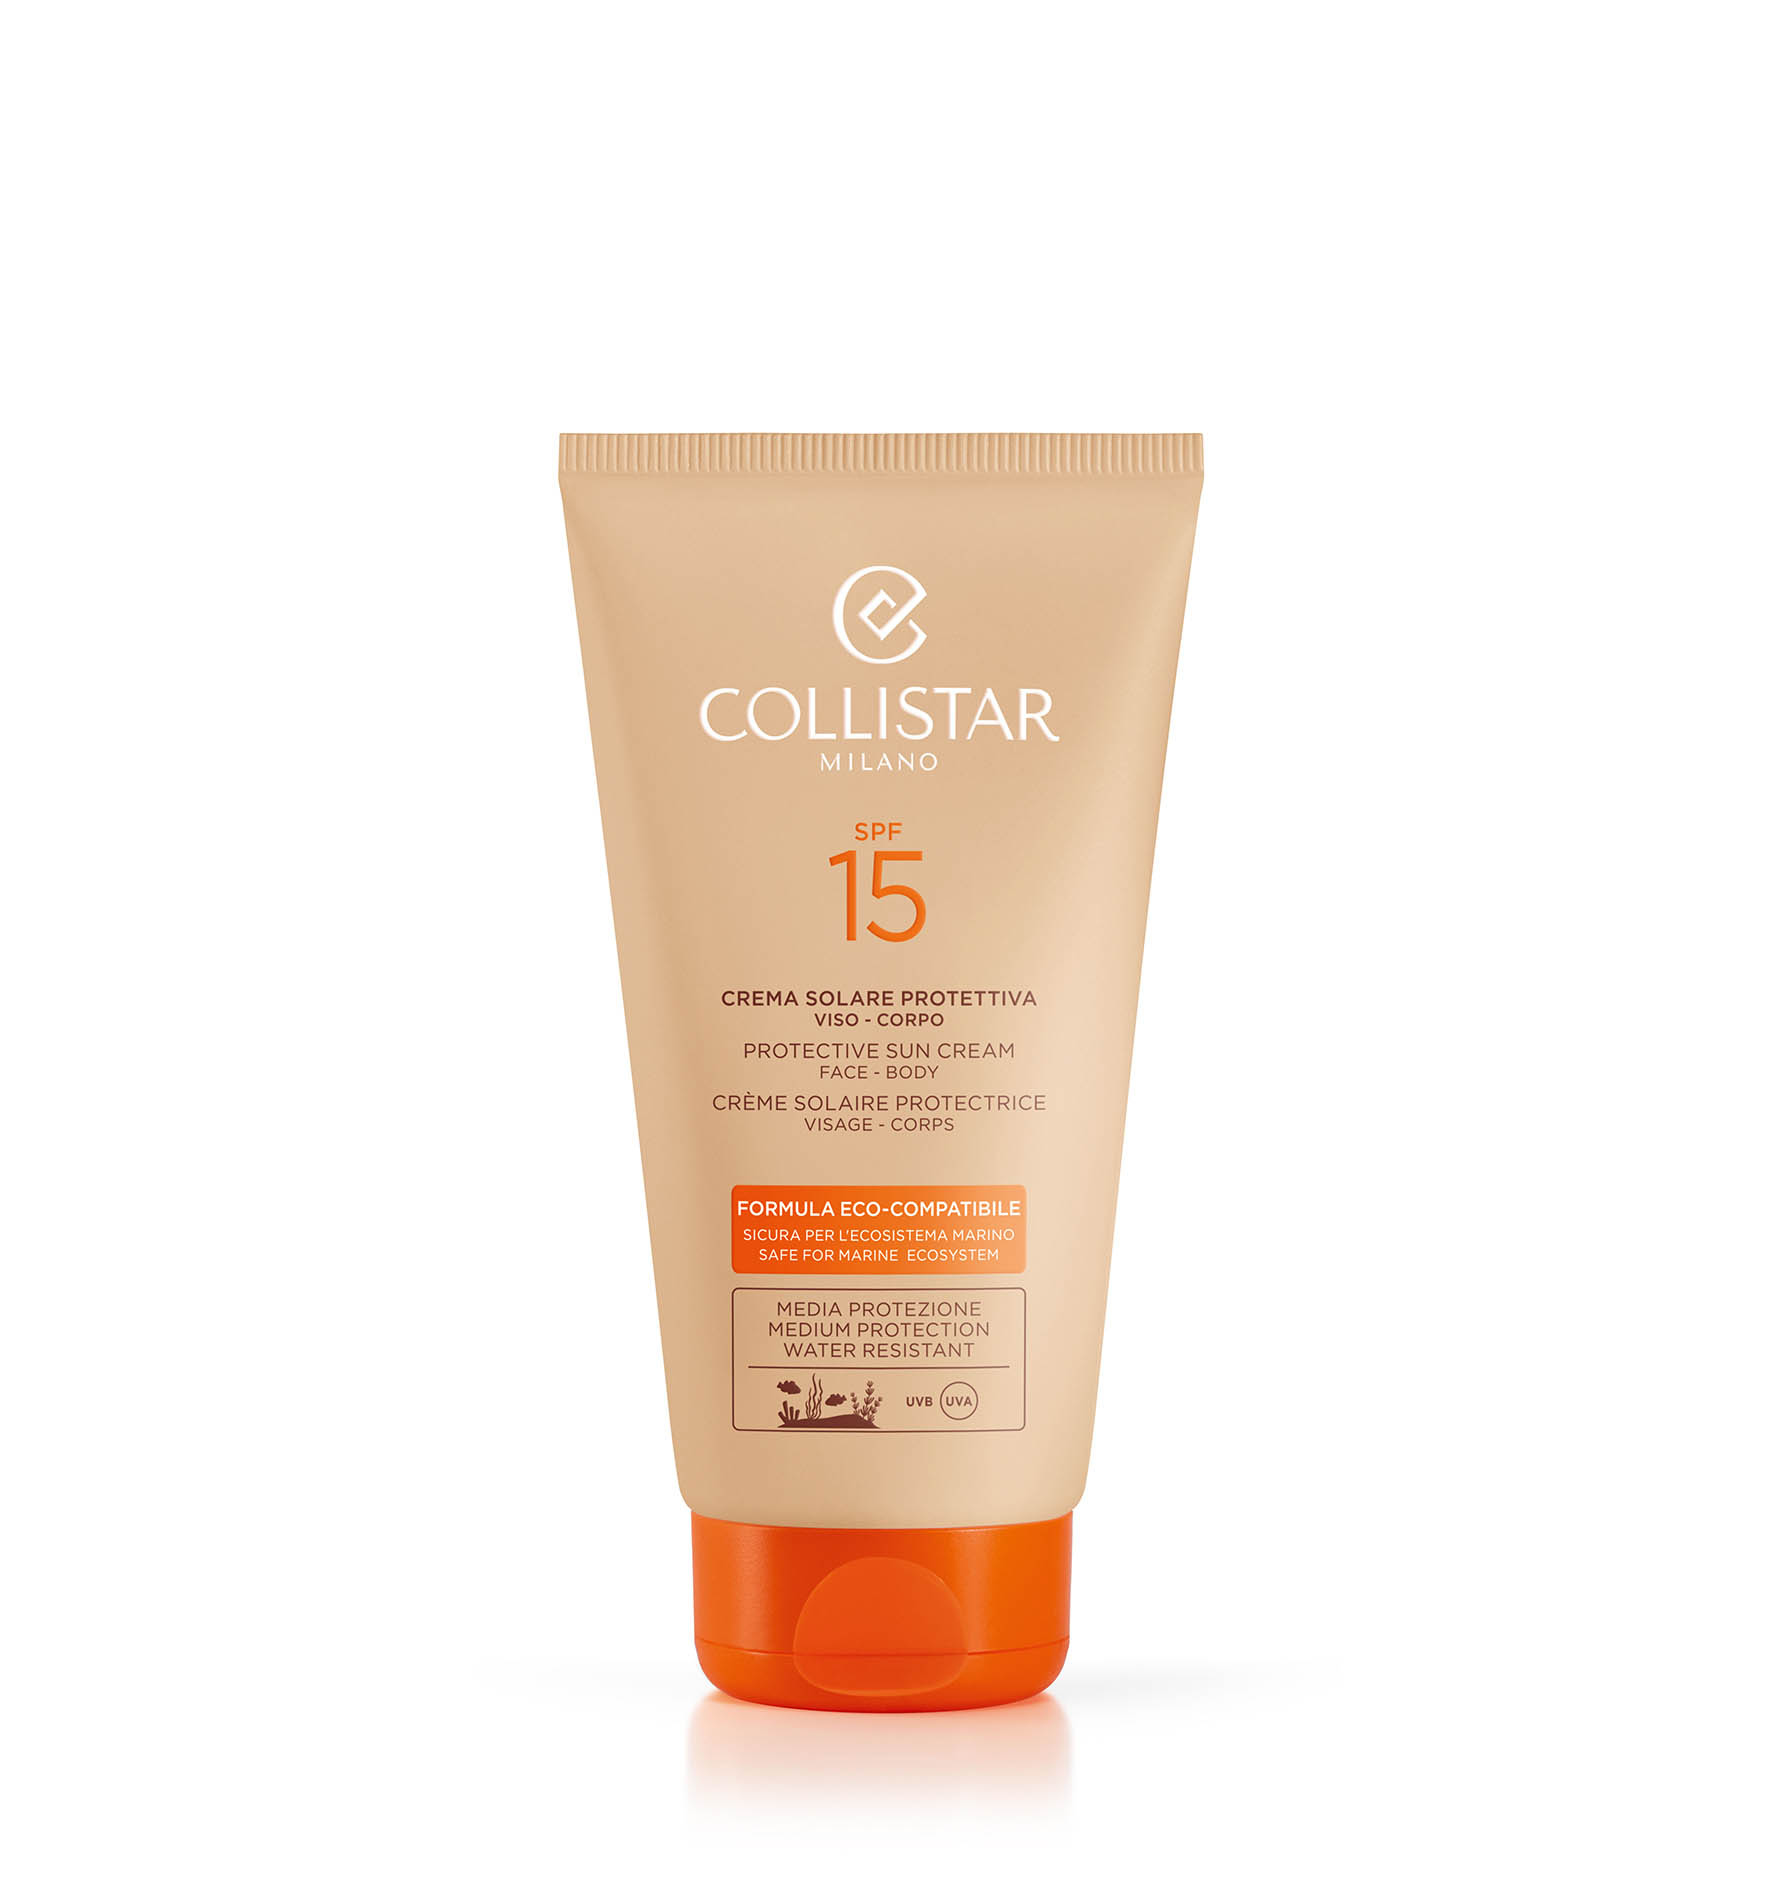 CRÈME SOLAIRE PROTECTRICE SPF 15 - Moyenne Protection SPF 15-20 | Collistar - Shop Online Ufficiale